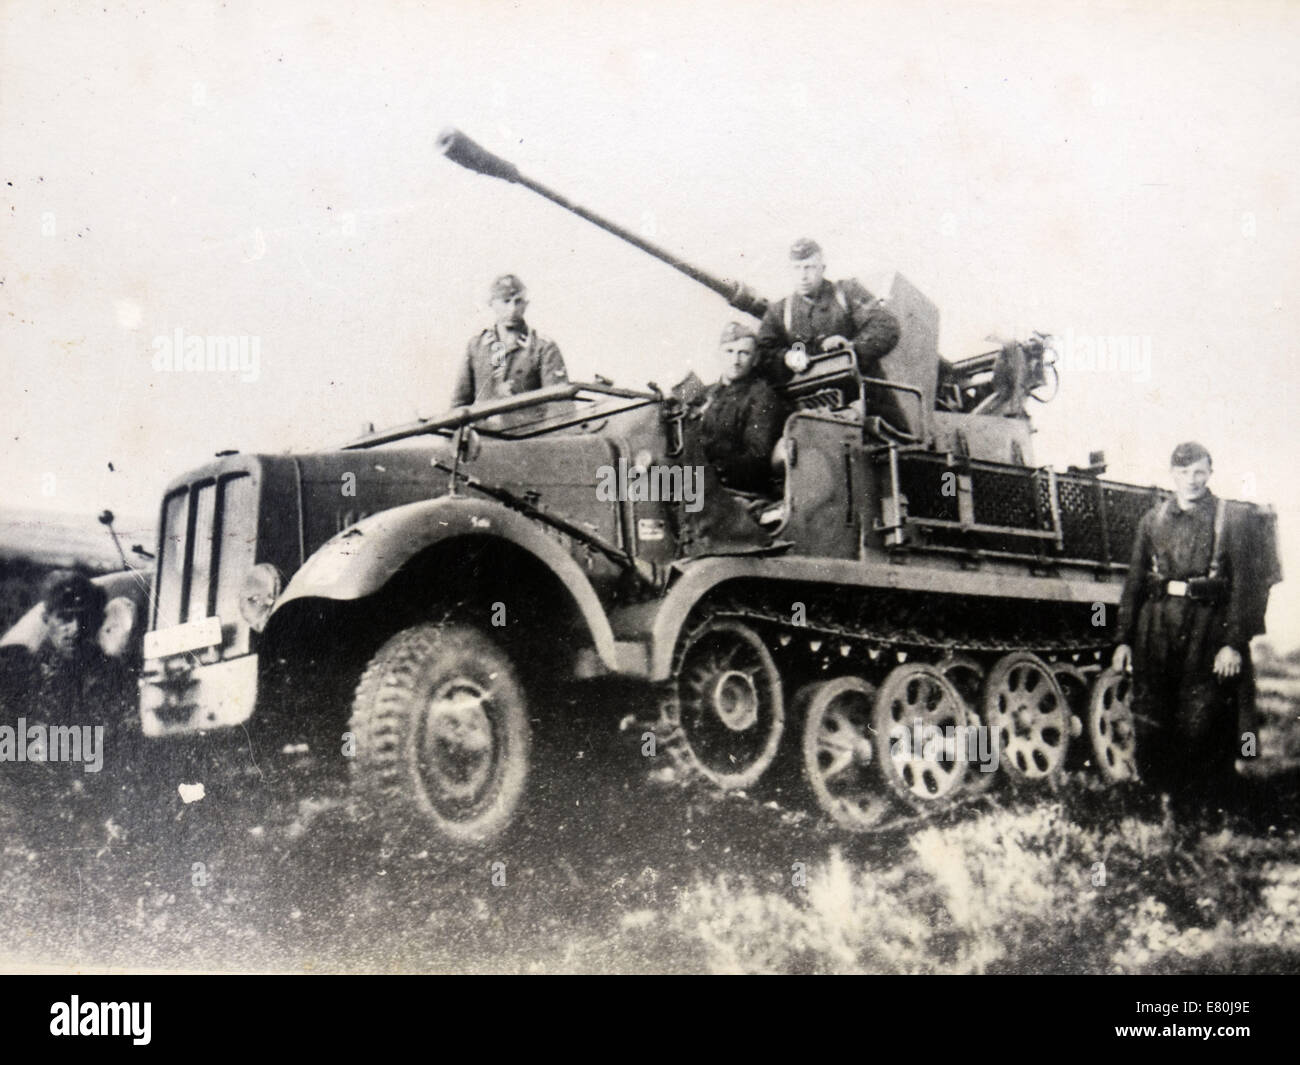 Sept. 27, 2014 - The SdKfz 6 (Sonderkraftfahrzeug 6) was a half-track military vehicle used by the German Wehrmacht during the Second World War. It was designed to be used as the main towing vehicle for the 10.5 cm leFH 18 howitzer. Germany, 1940s. Reproduction of antique photo. © Igor Golovniov/ZUMA Wire/ZUMAPRESS.com/Alamy Live News Stock Photo